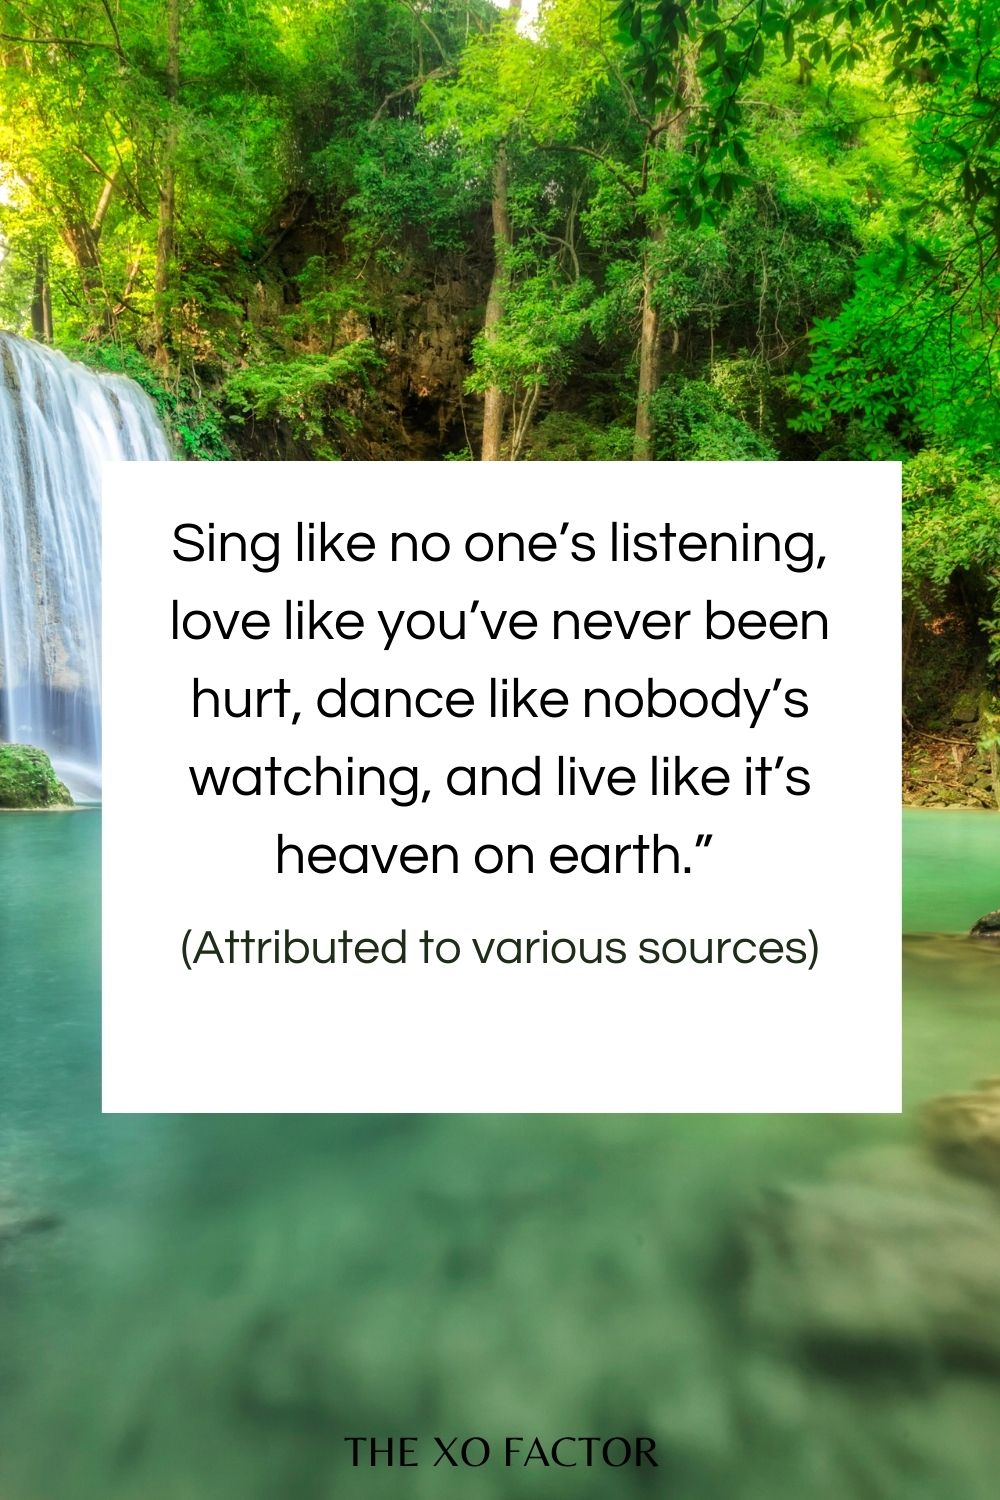 Sing like no one’s listening, love like you’ve never been hurt, dance like nobody’s watching, and live like it’s heaven on earth.” – (Attributed to various sources)